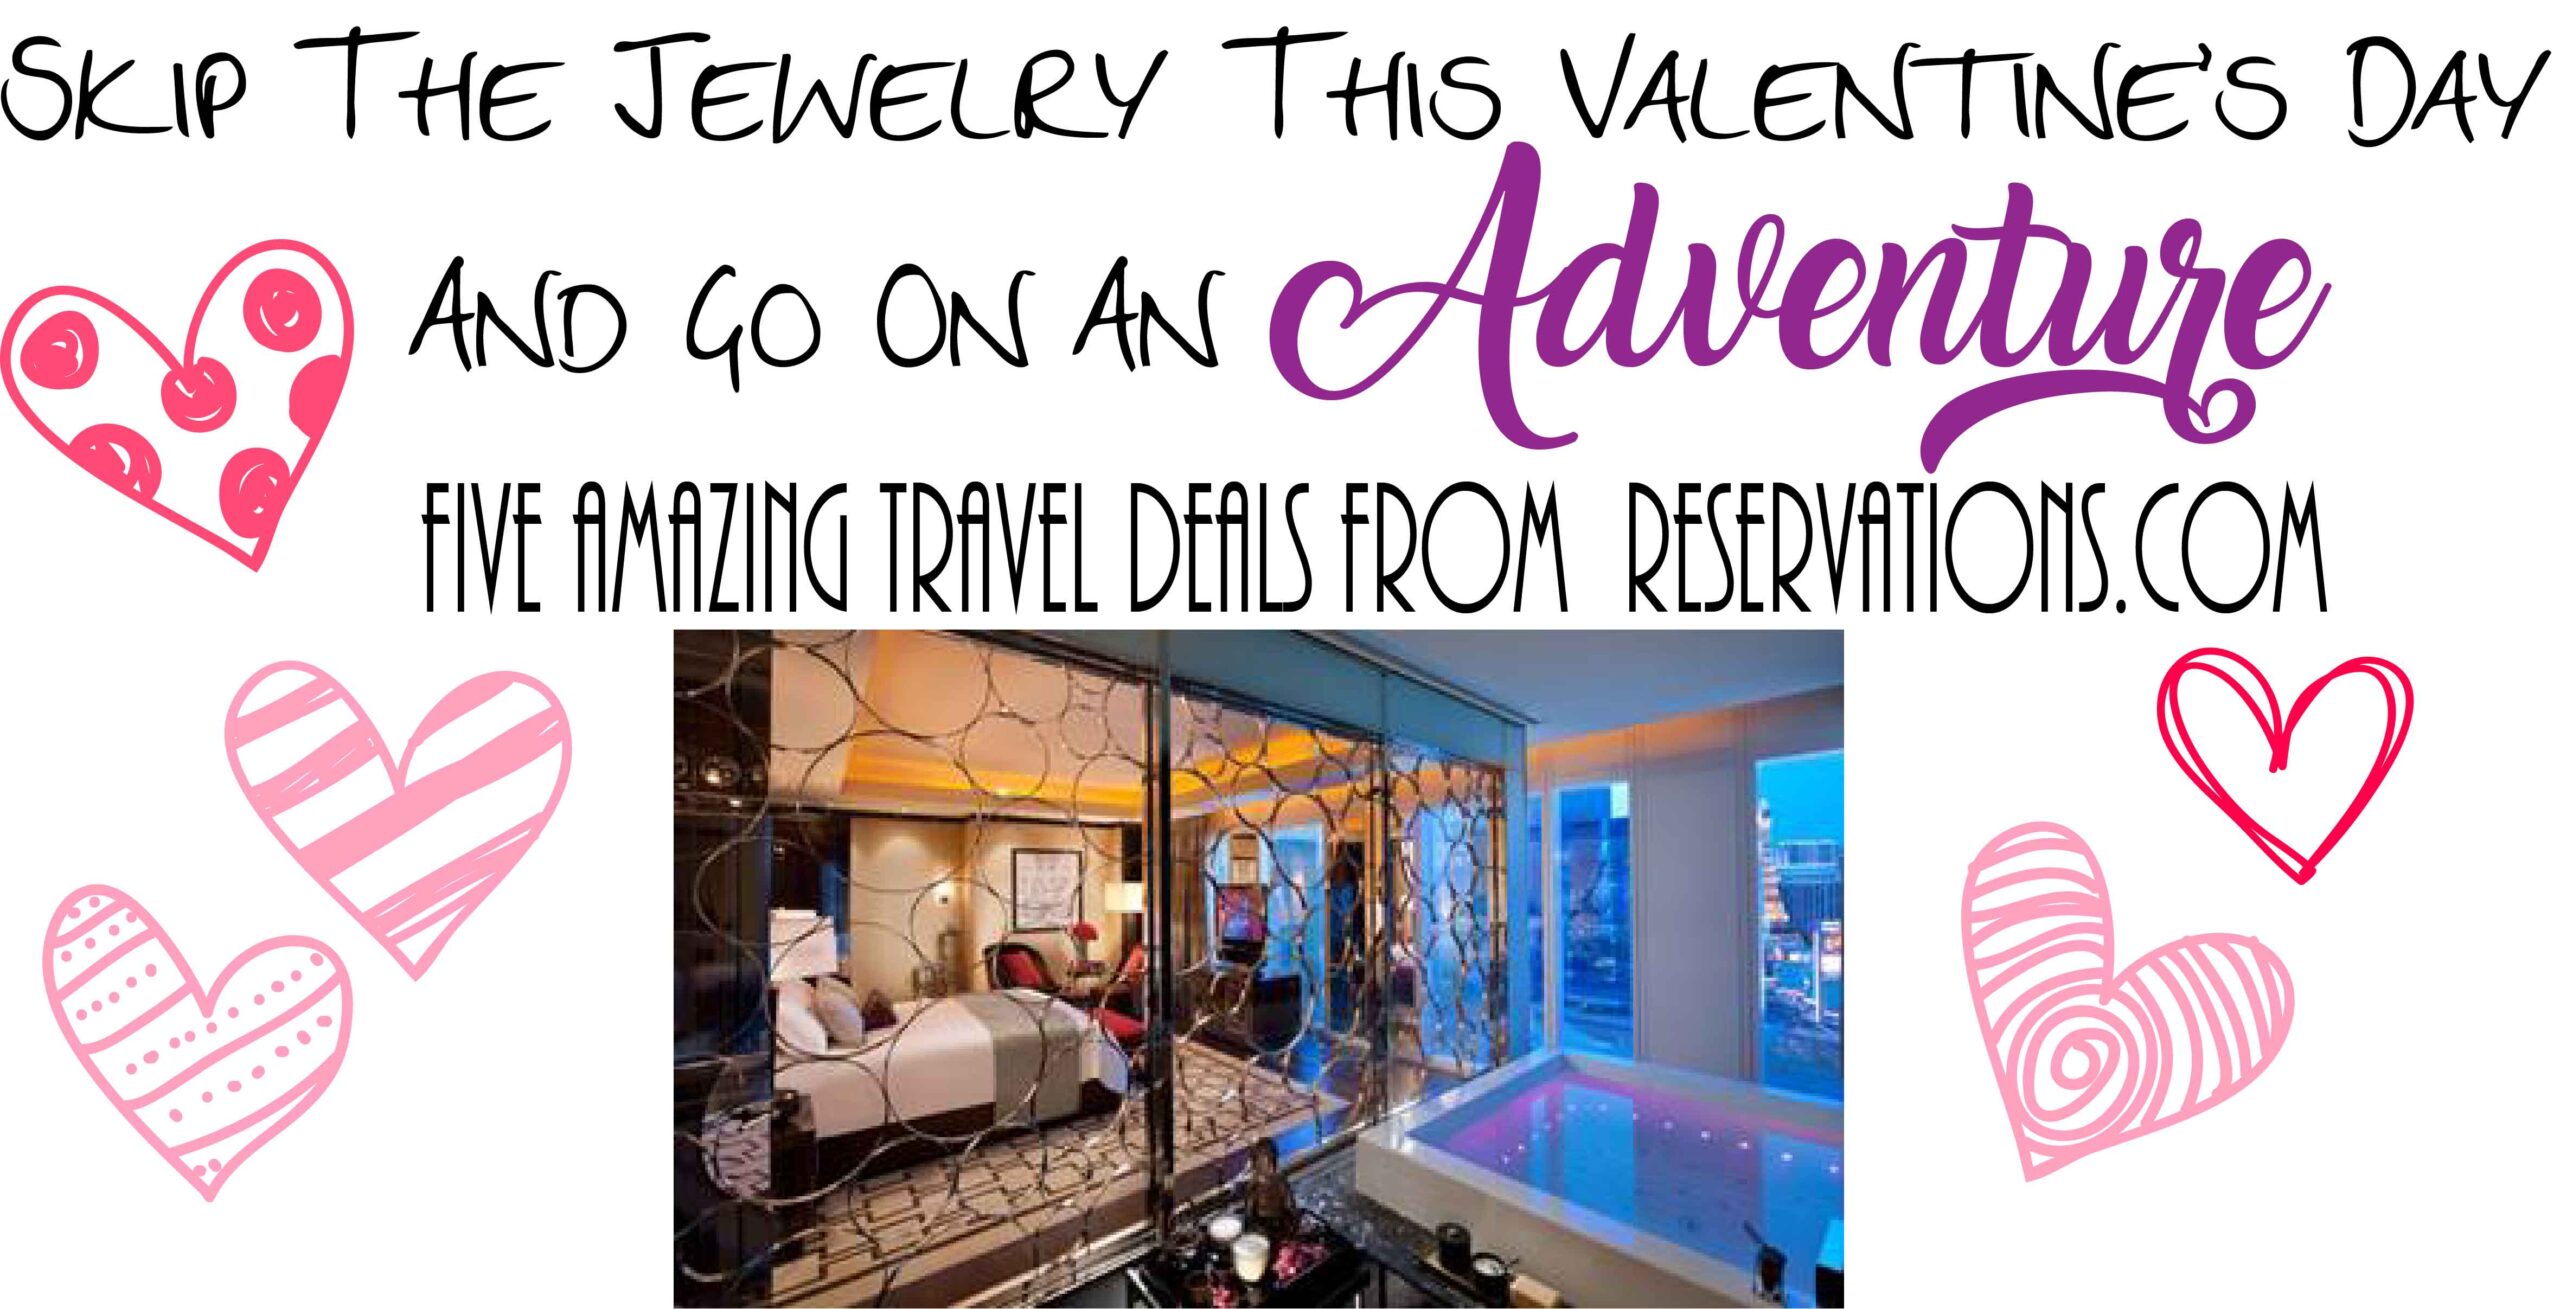 Skip The Jewelry This Valentine’s Day And Go On An Adventure